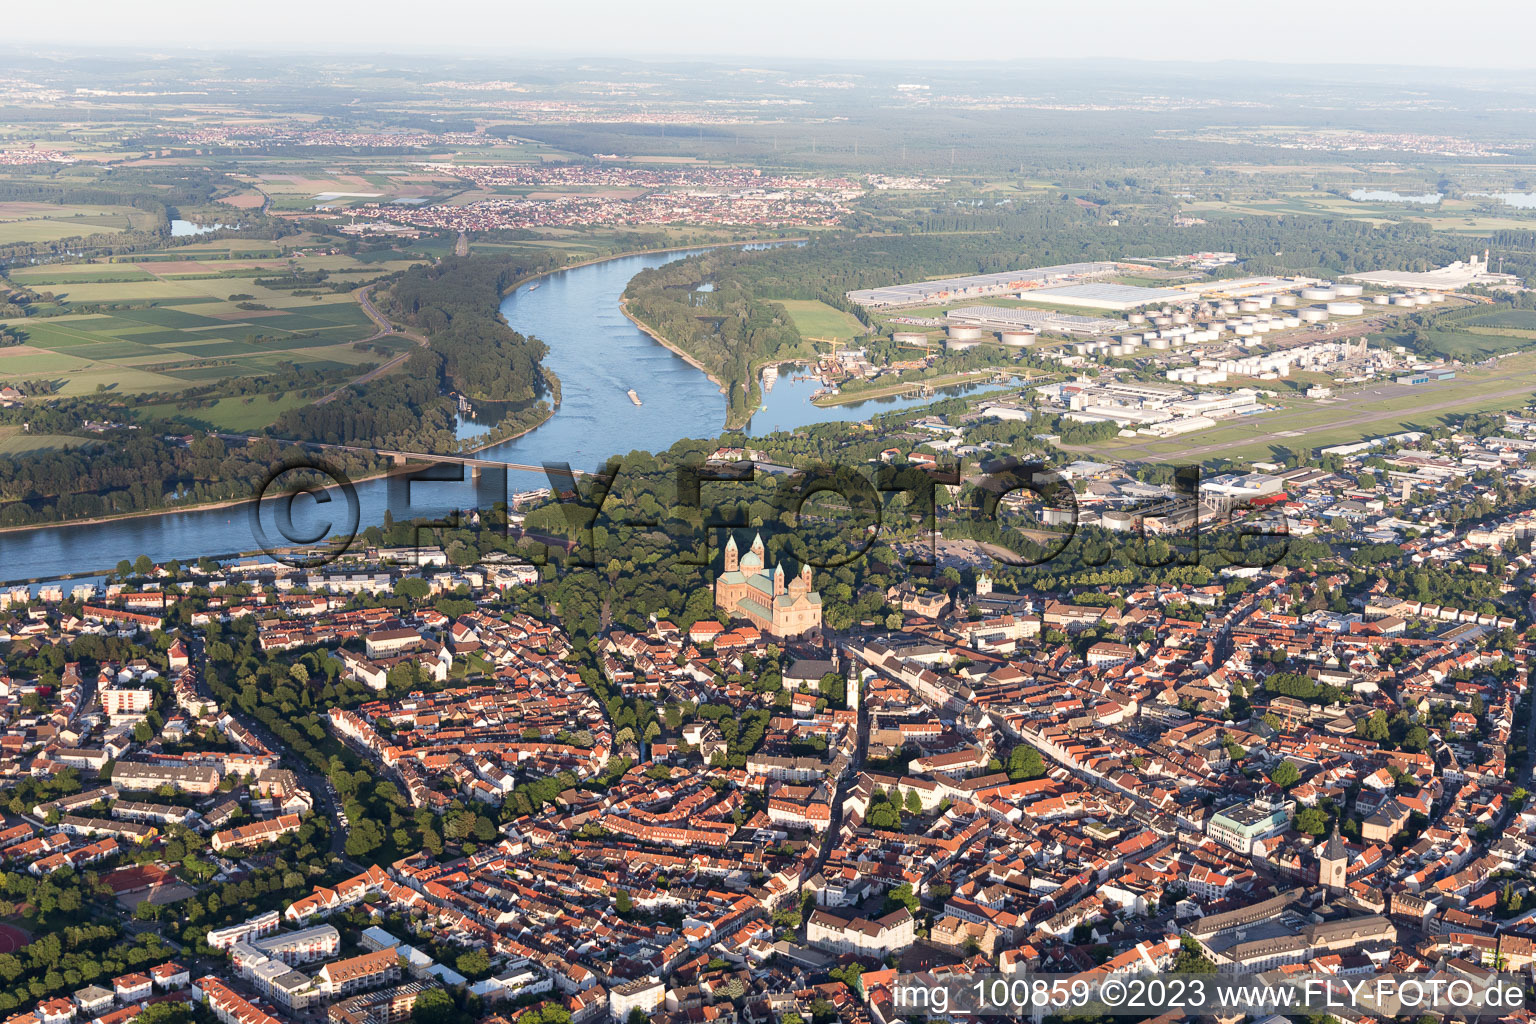 Speyer in the state Rhineland-Palatinate, Germany from the drone perspective